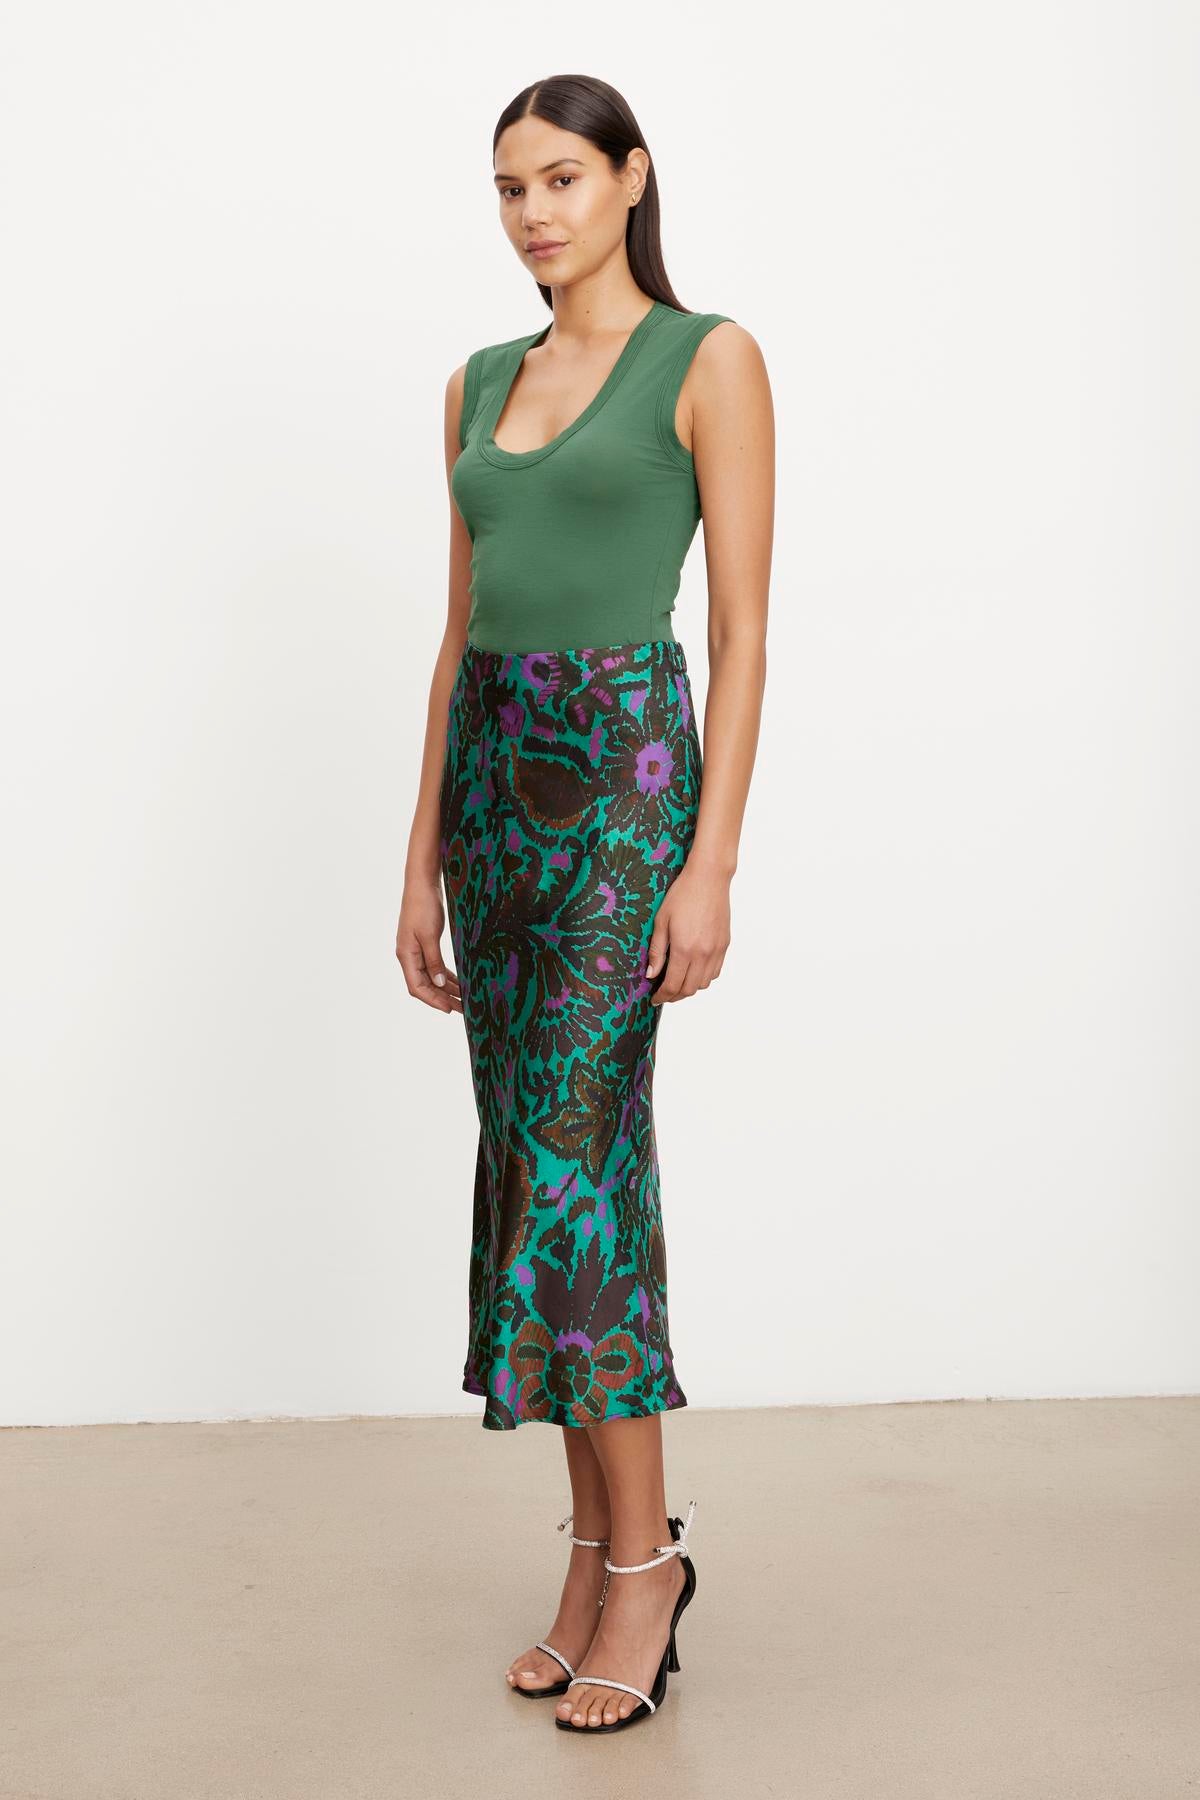   The model is wearing a green top and Velvet by Graham & Spencer's KAIYA PRINTED SKIRT with an elastic waist, creating an A-line silhouette. 